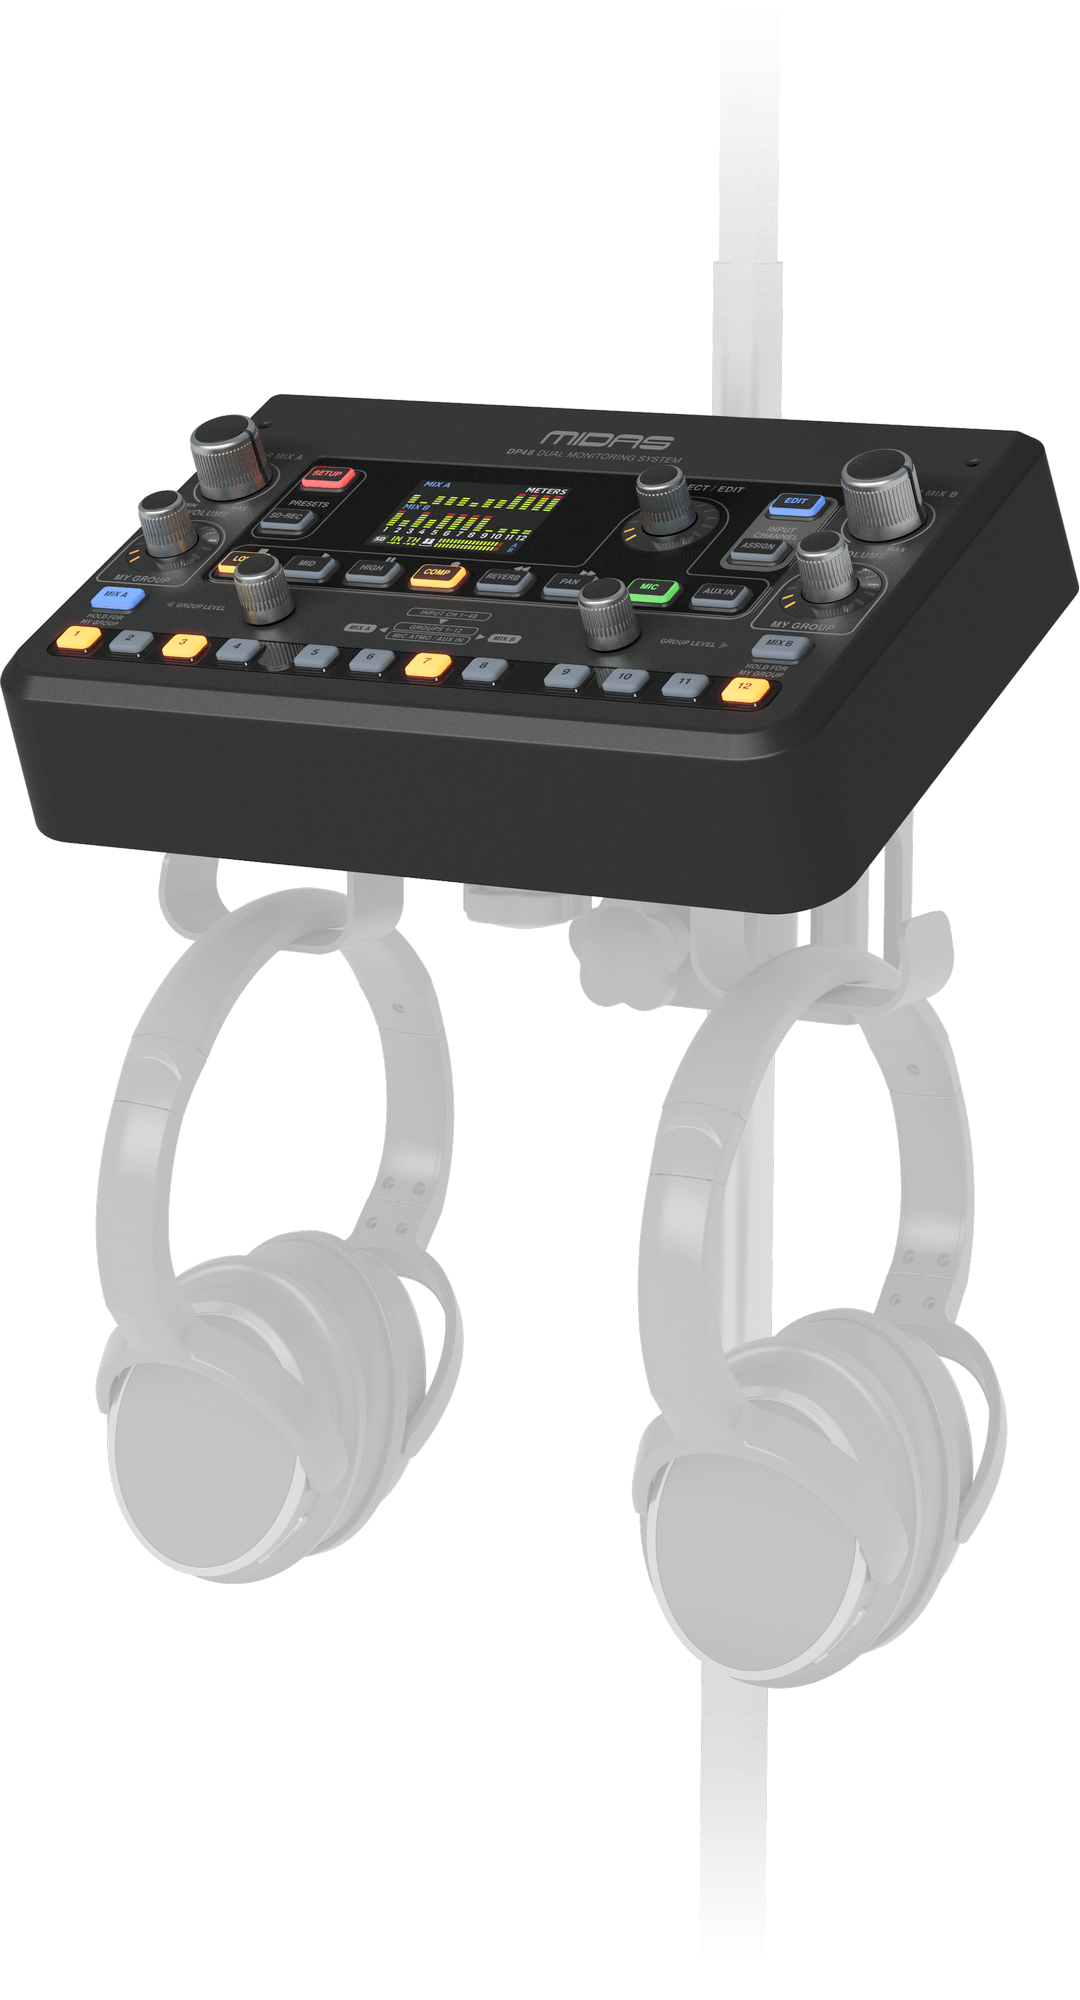 MIDAS-DP48 - Dual 48-Channel Personal Monitor Mixer